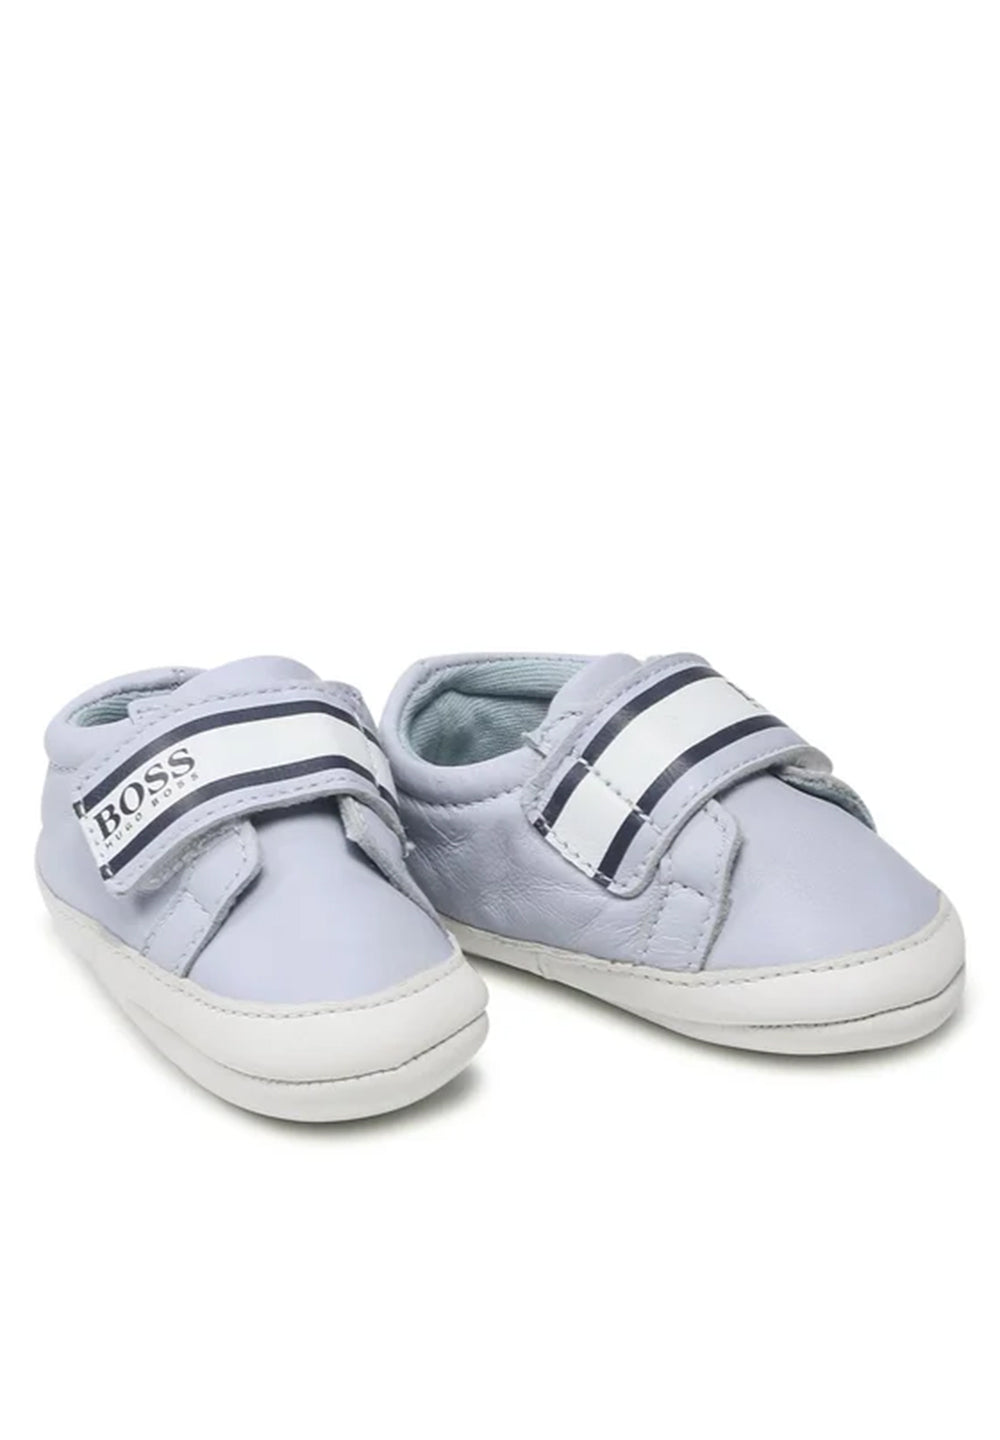 Blue shoes for newborn